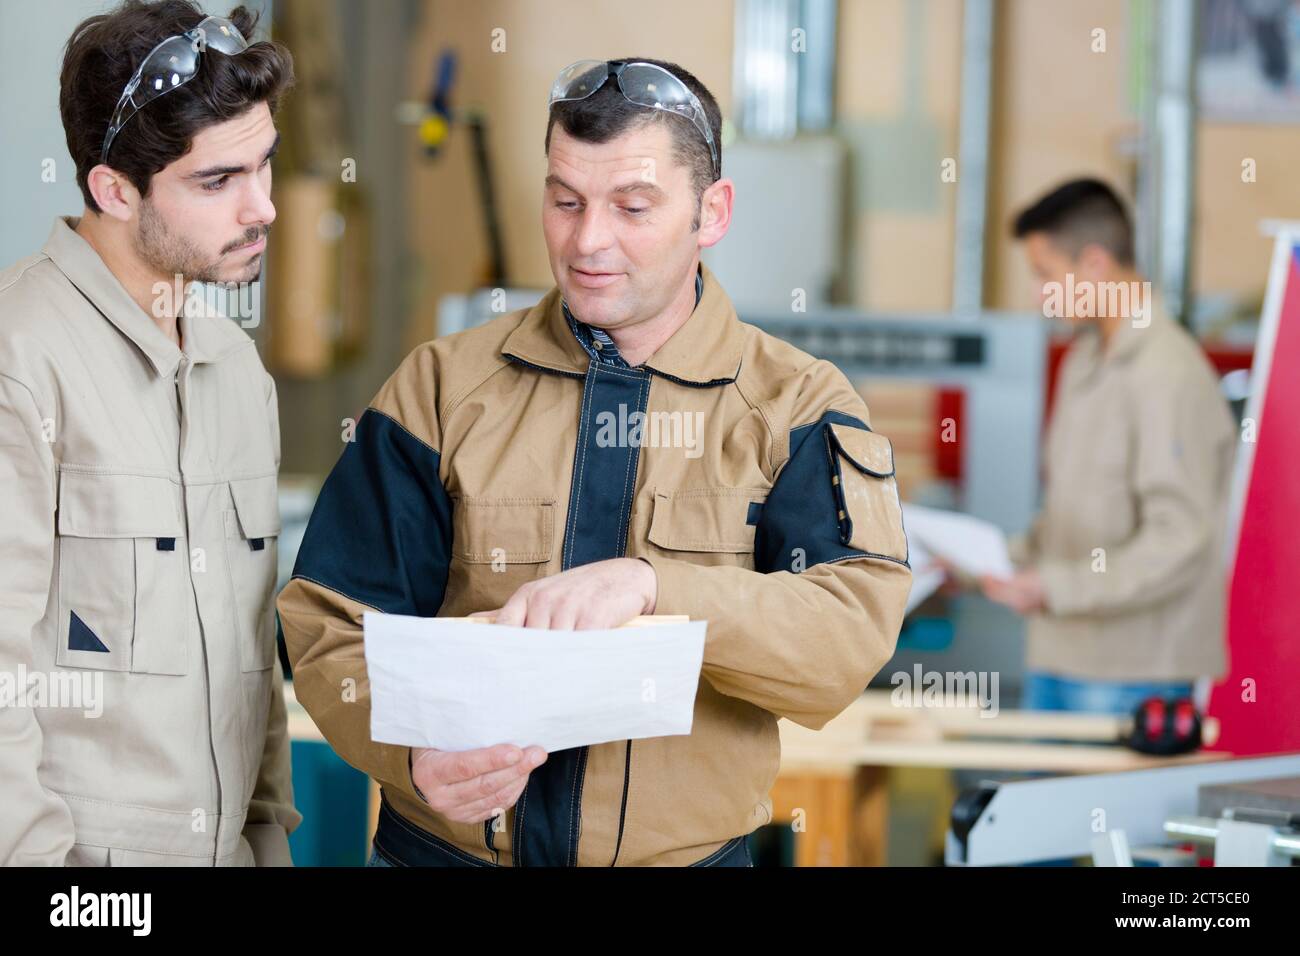 happy male worker showing something to coworker Stock Photo